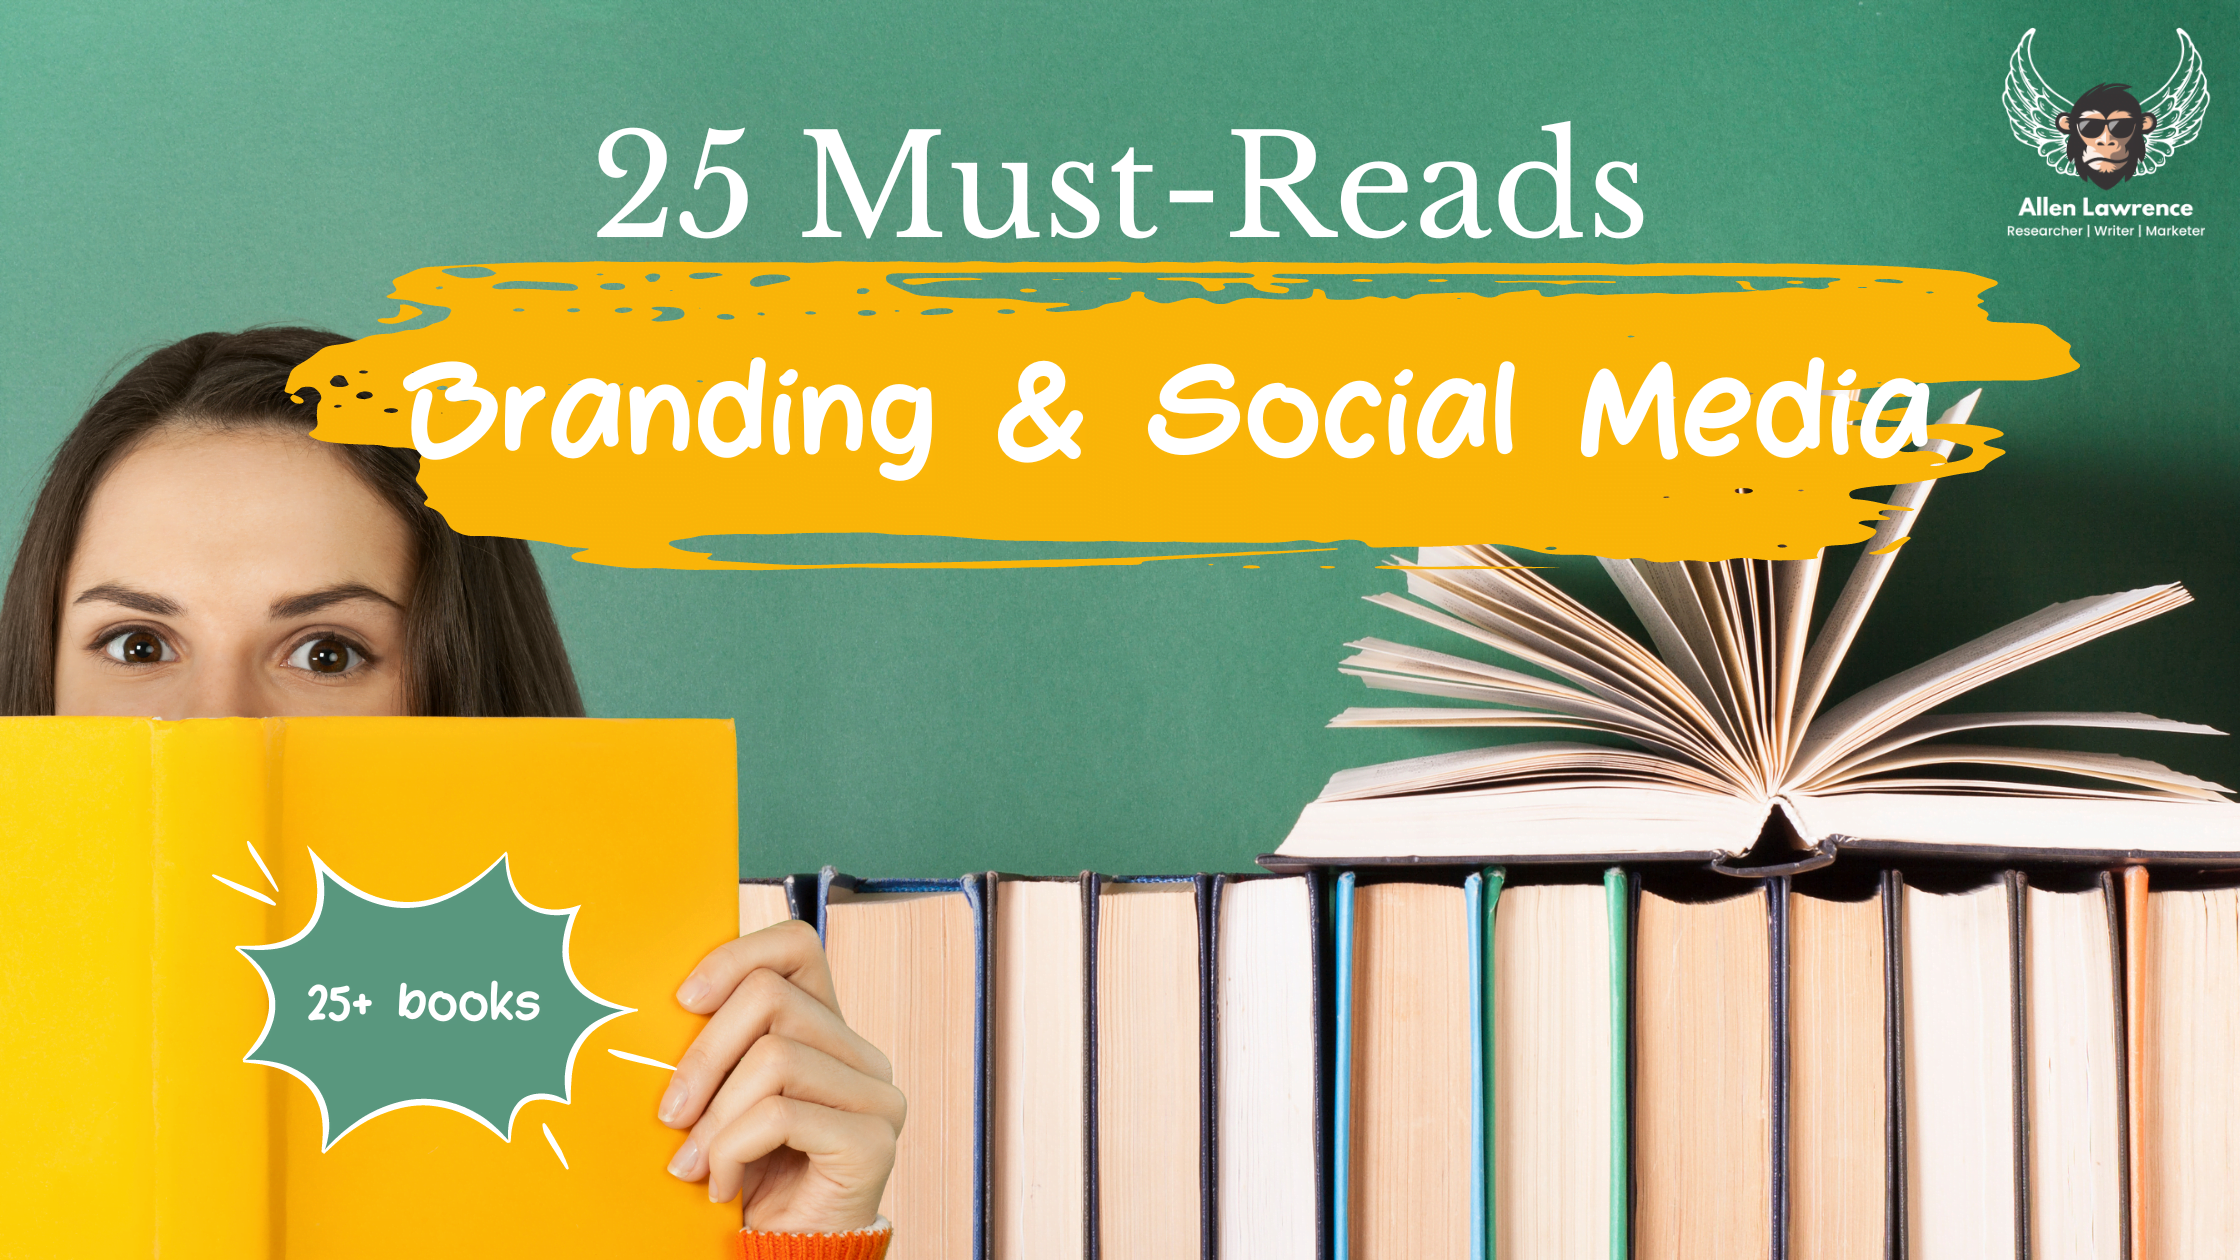 Top 25 Books For Building Your Brand And Crushing It On Social Media